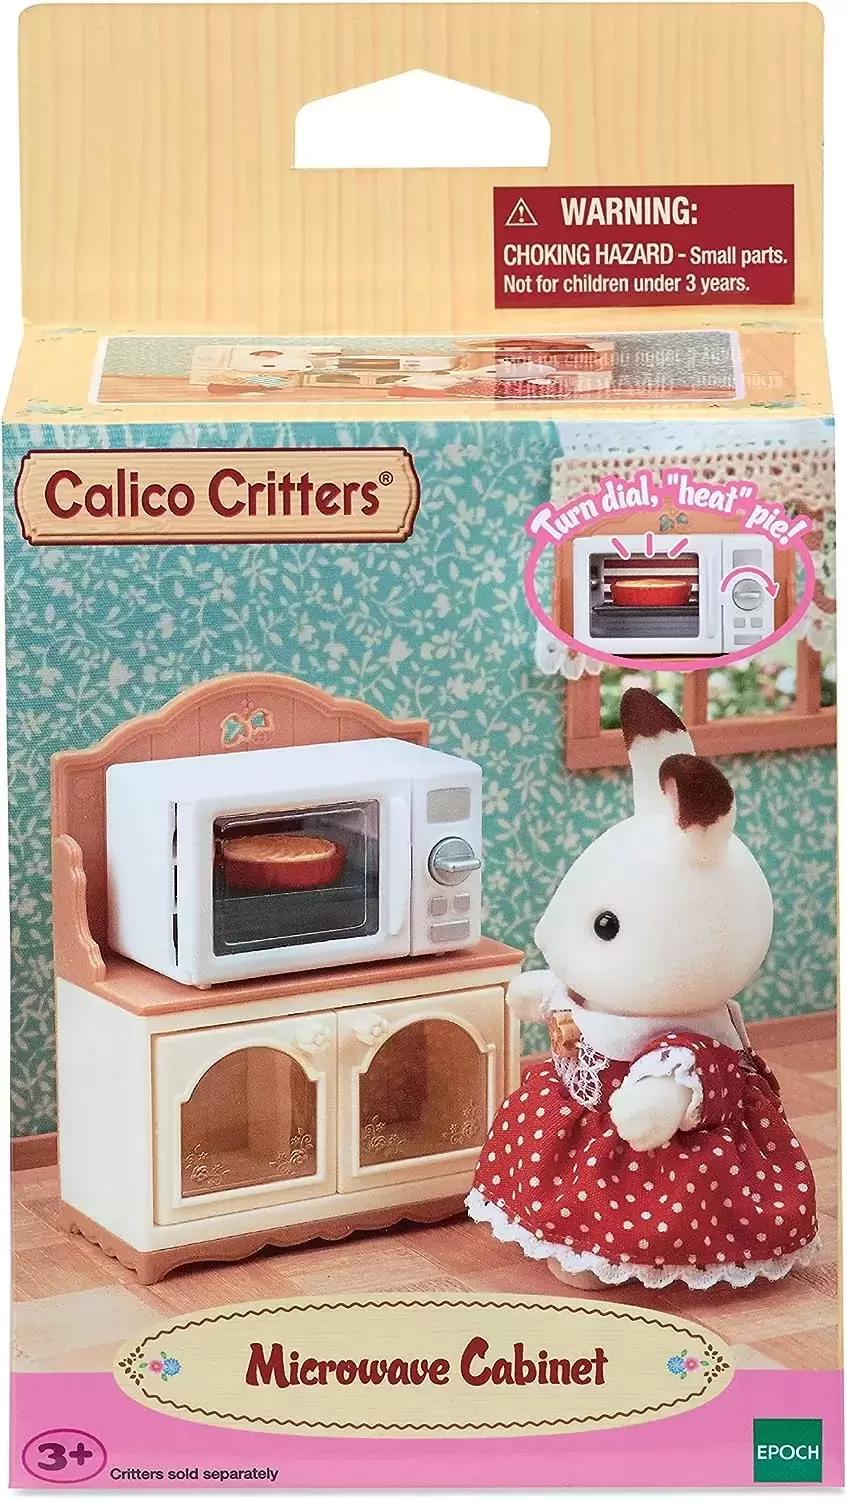 Calico Critters (USA, Canada) - Microwave Cabinet